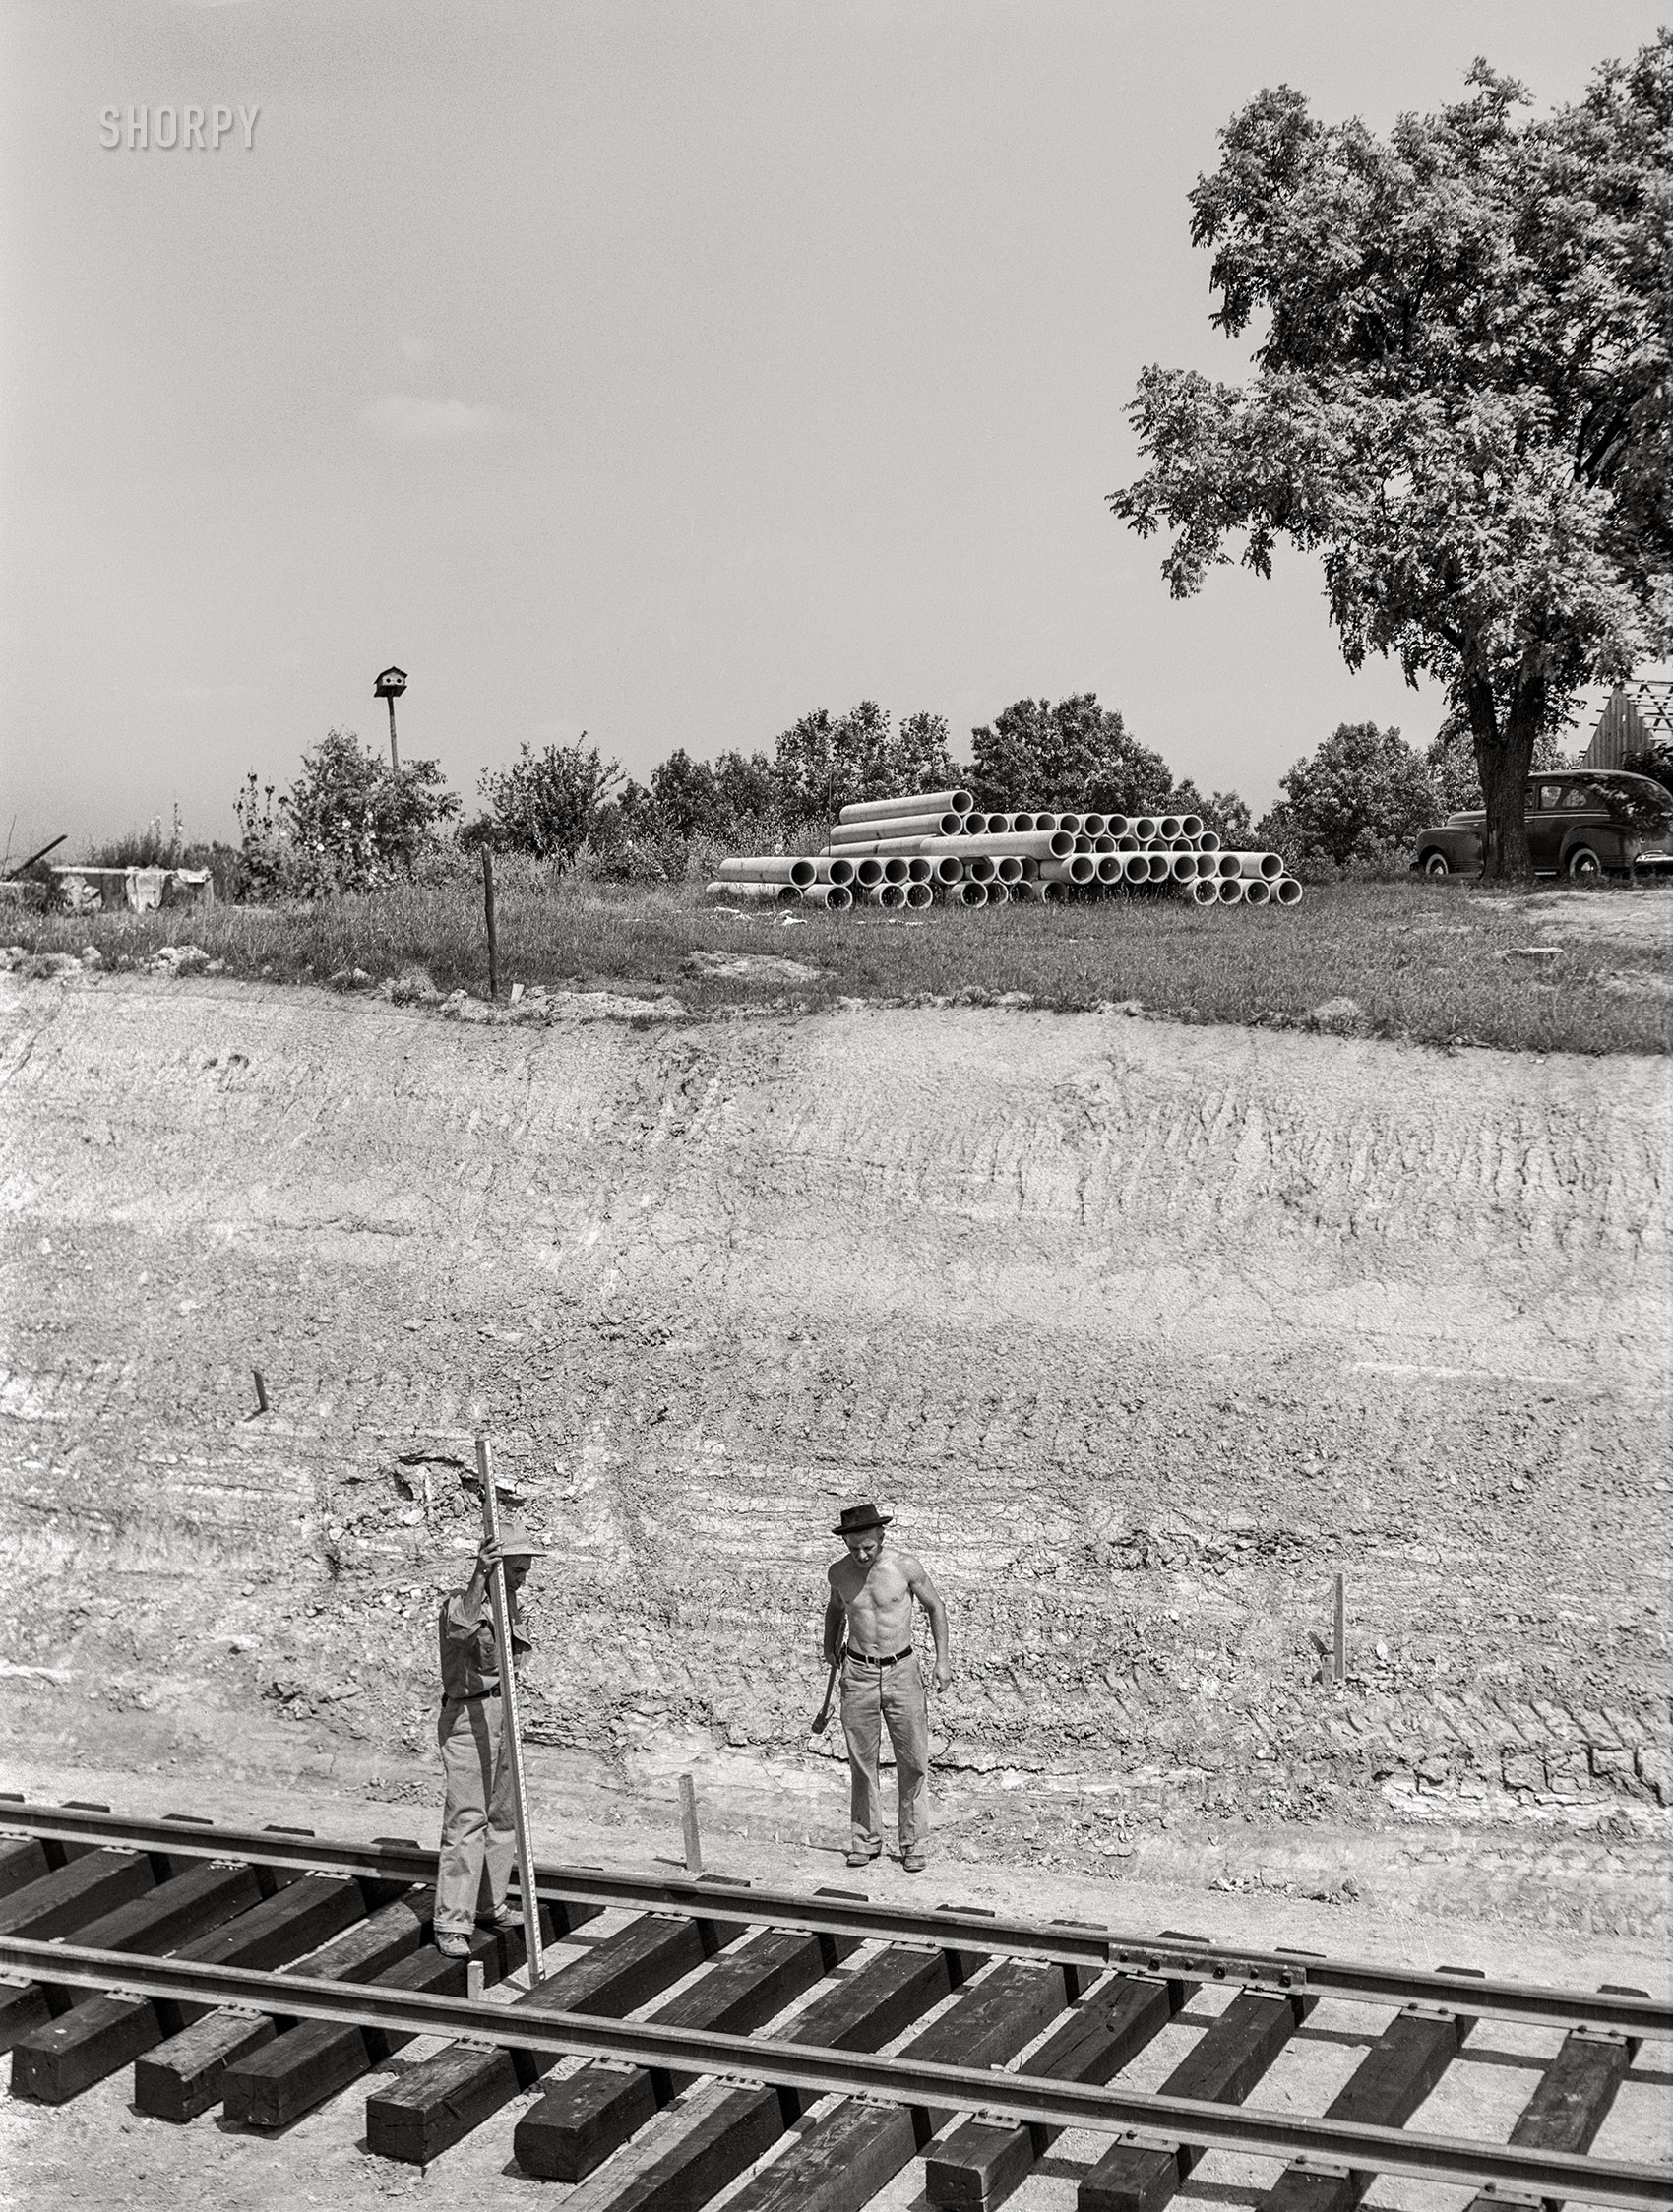 June 1941. "Surveyors at work in Martin County, Indiana, where naval ammunition depot is being constructed on 42,000 acre tract. 160 families will be displaced." Medium format acetate negative by John Vachon for the Farm Security Administration. View full size.